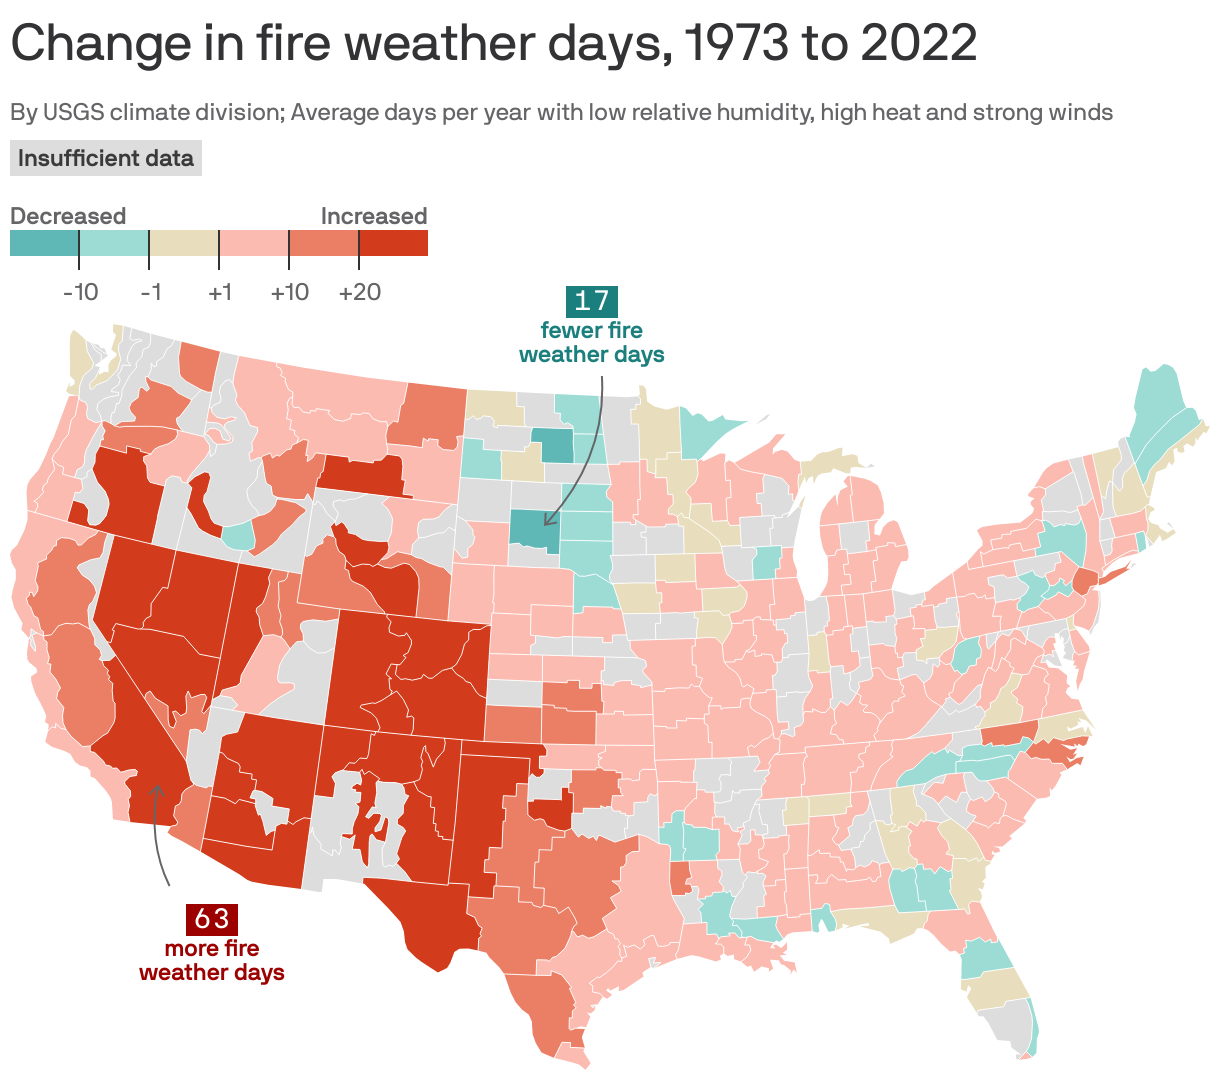 Change in fire weather days, 1973 to 2022